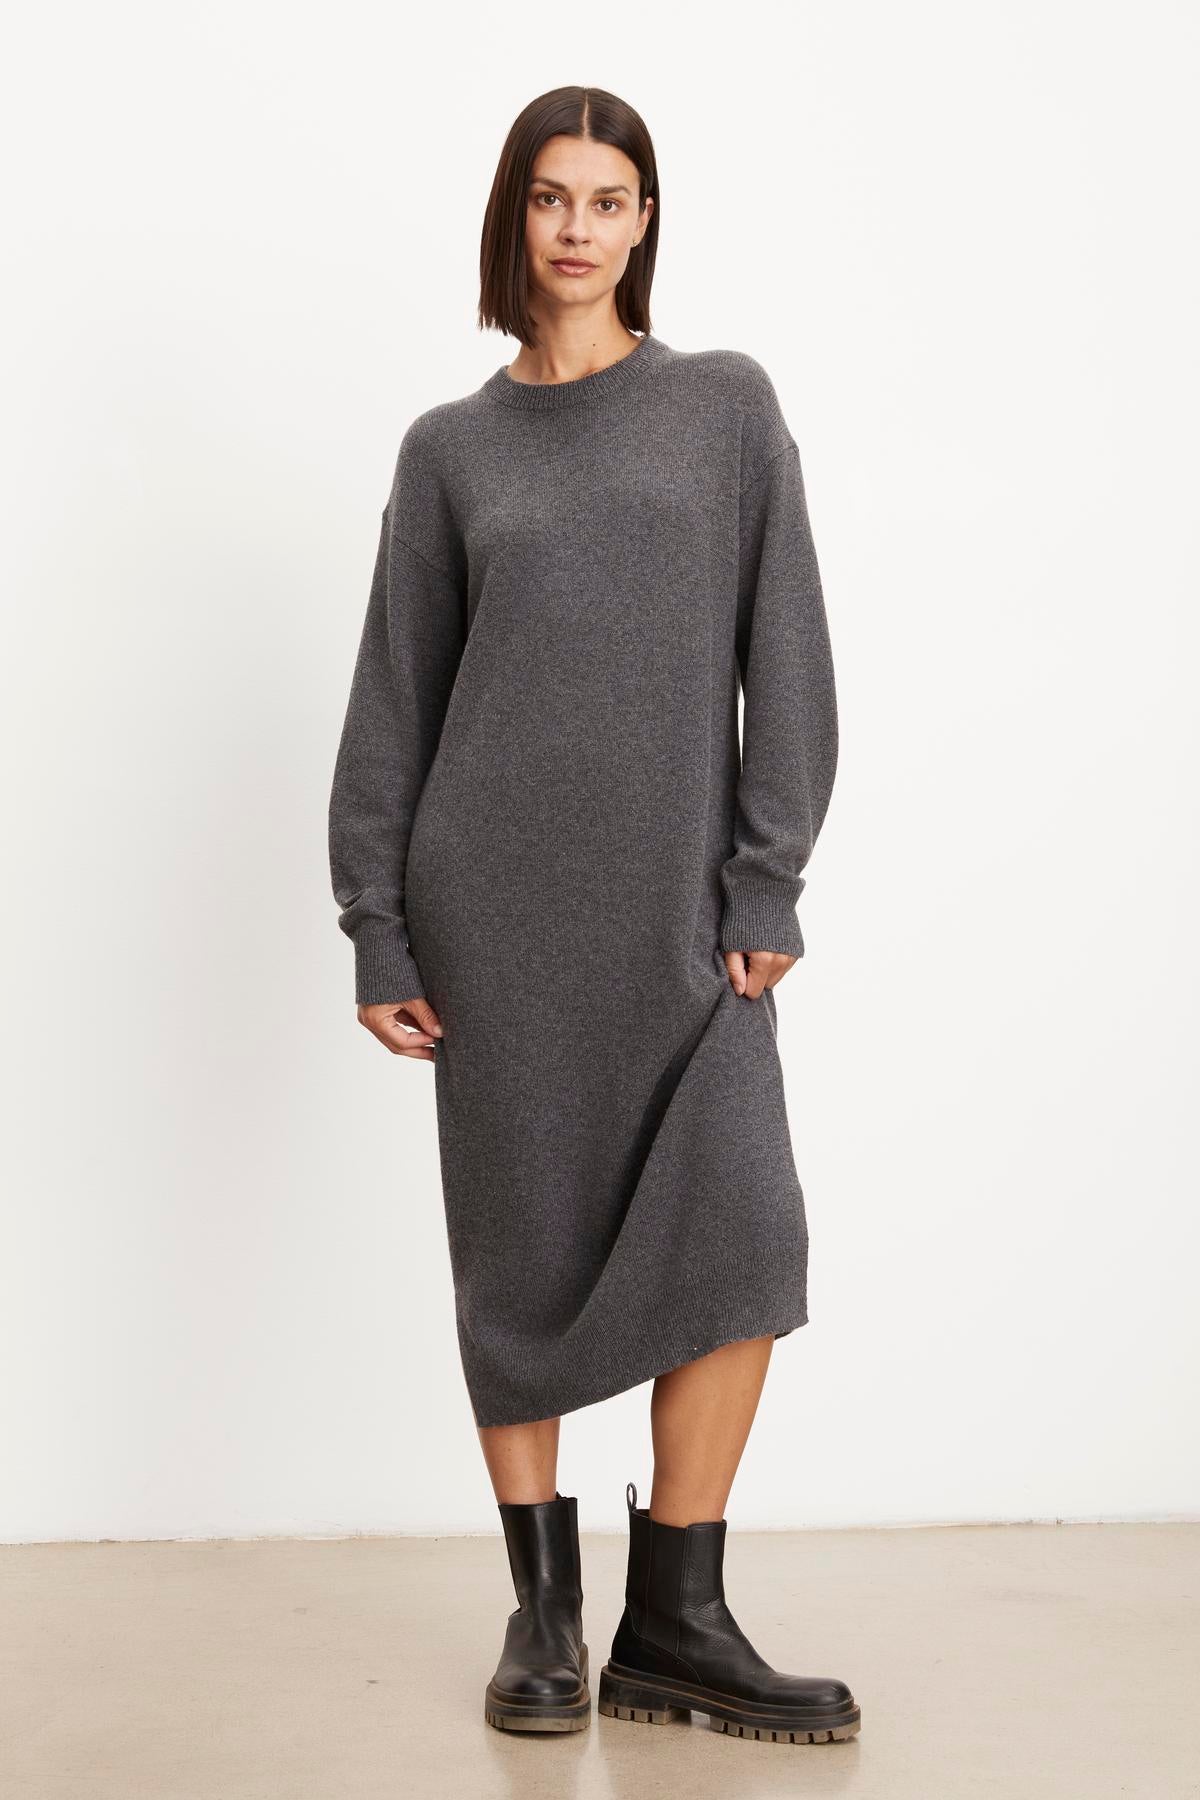 A woman standing in a minimalist setting, wearing a long, gray KADEN SWEATER DRESS with a side split hem and black combat boots from Velvet by Graham & Spencer.-35655585202369